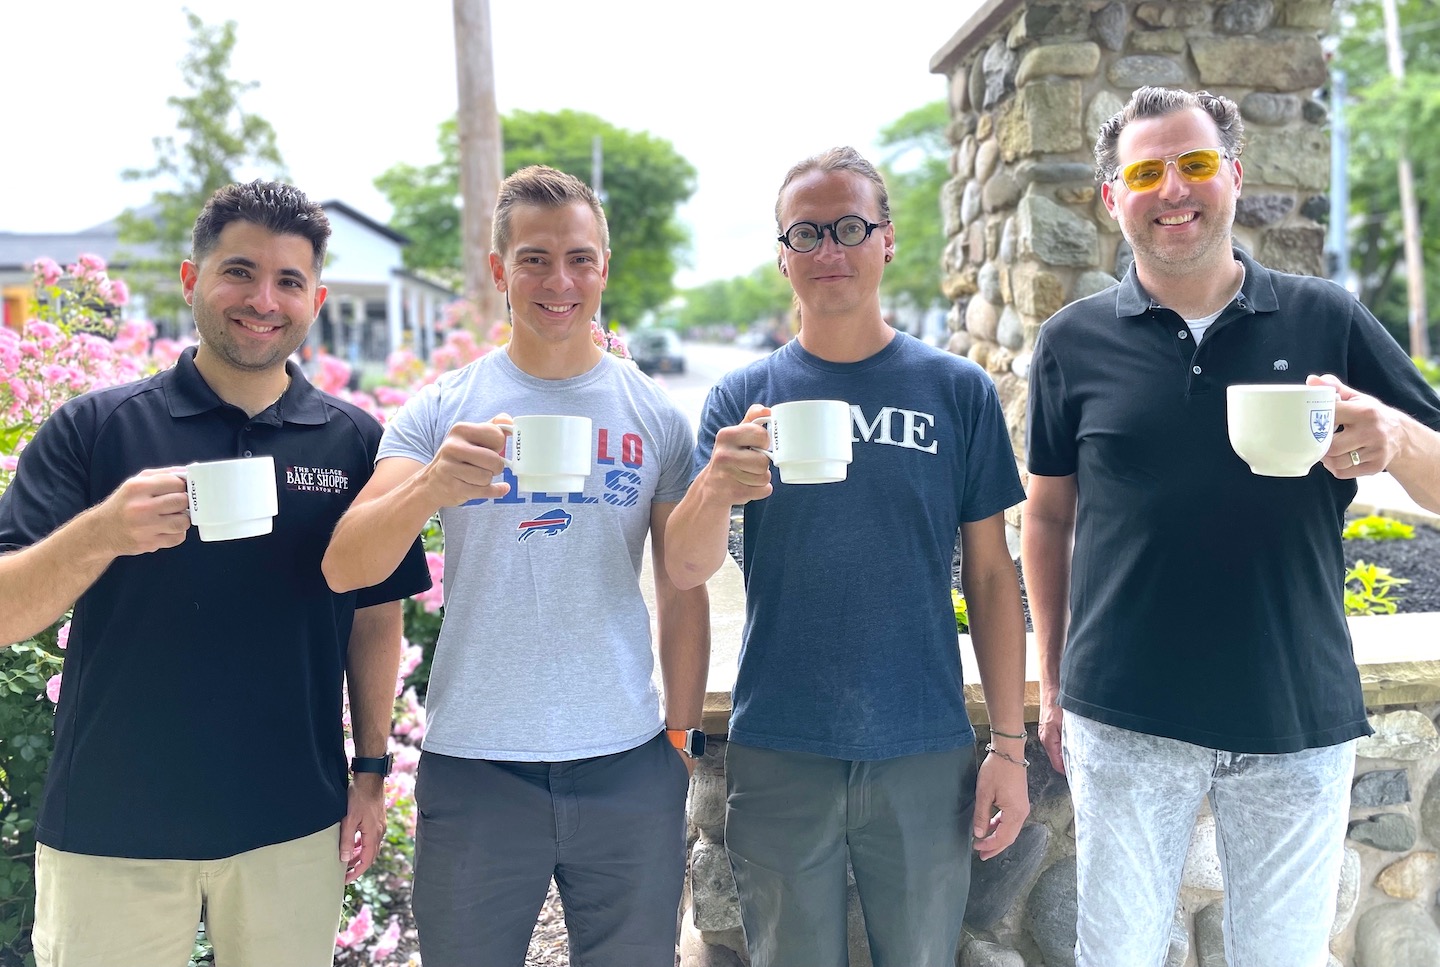 Lewiston business owners are giving back to active-duty and retired military members over the July 1-4 weekend. Pictured on Center Street, from left, are Mike Fiore of The Village Bake Shoppe, Joel Erway of The Webinar Agency, Michael Broderick of The Orange Cat Coffee Co., and Matt DiCamillo of DiCamillo Bakery.